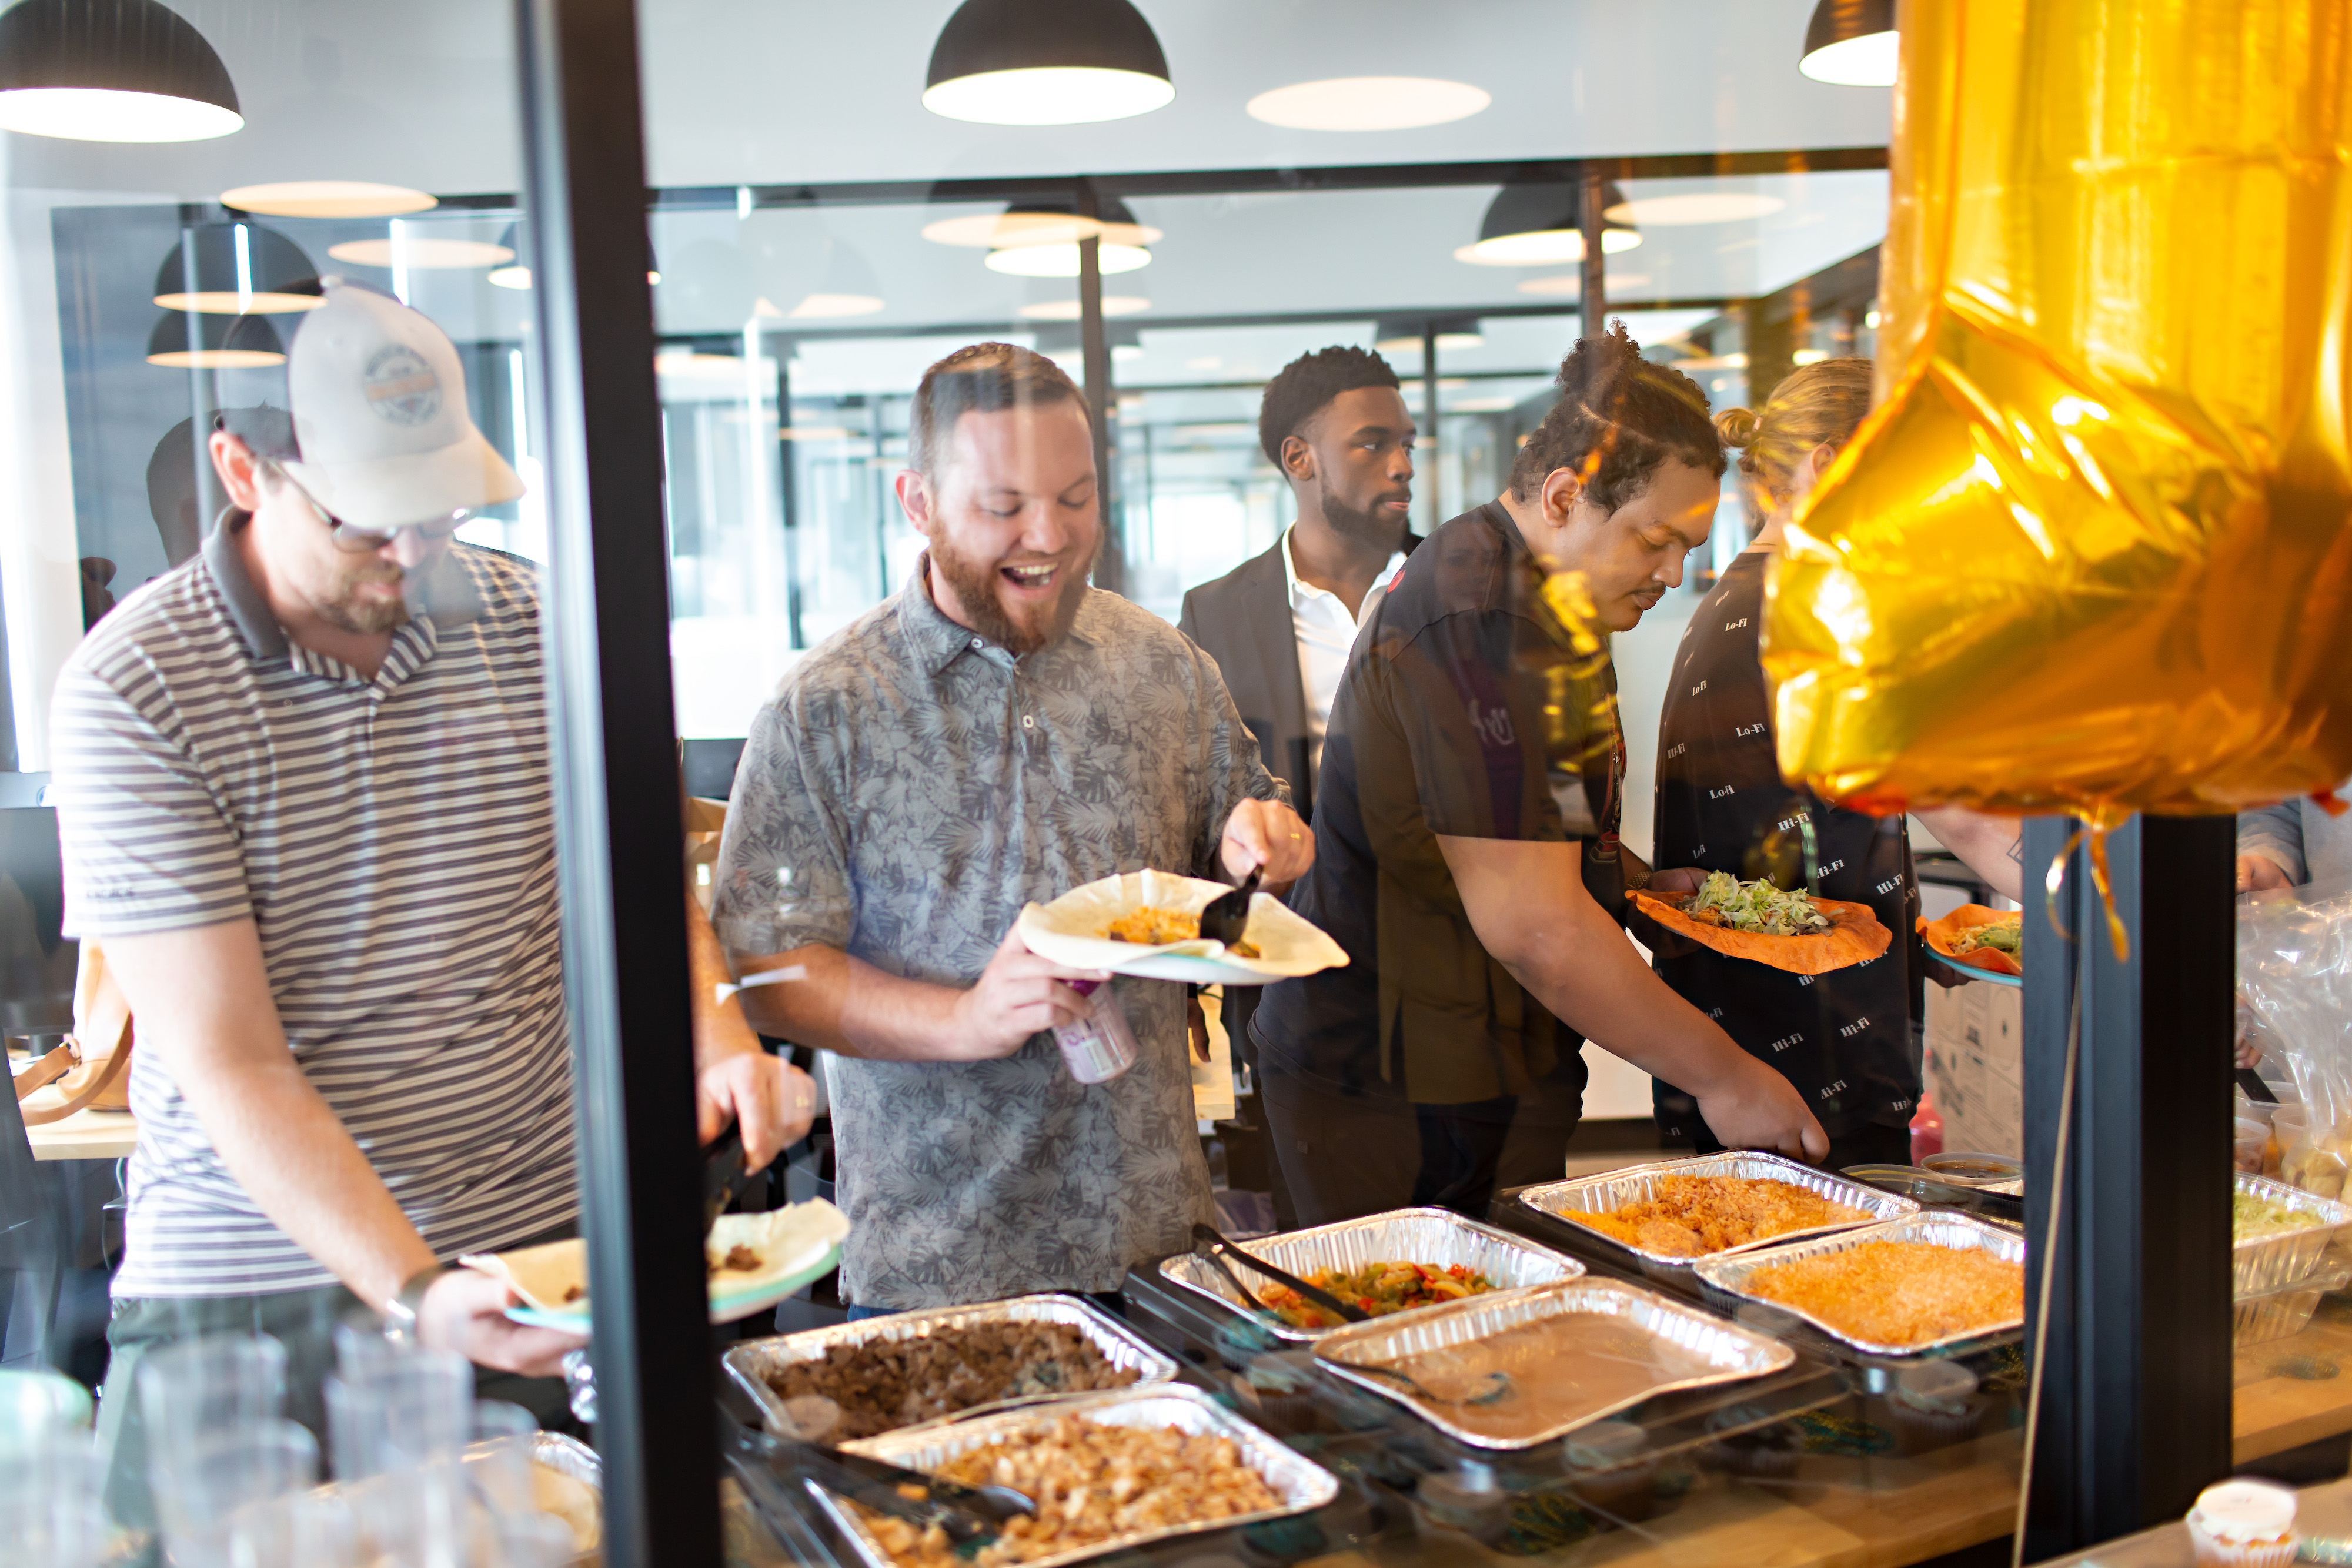 RealWork employees smile and laugh over food